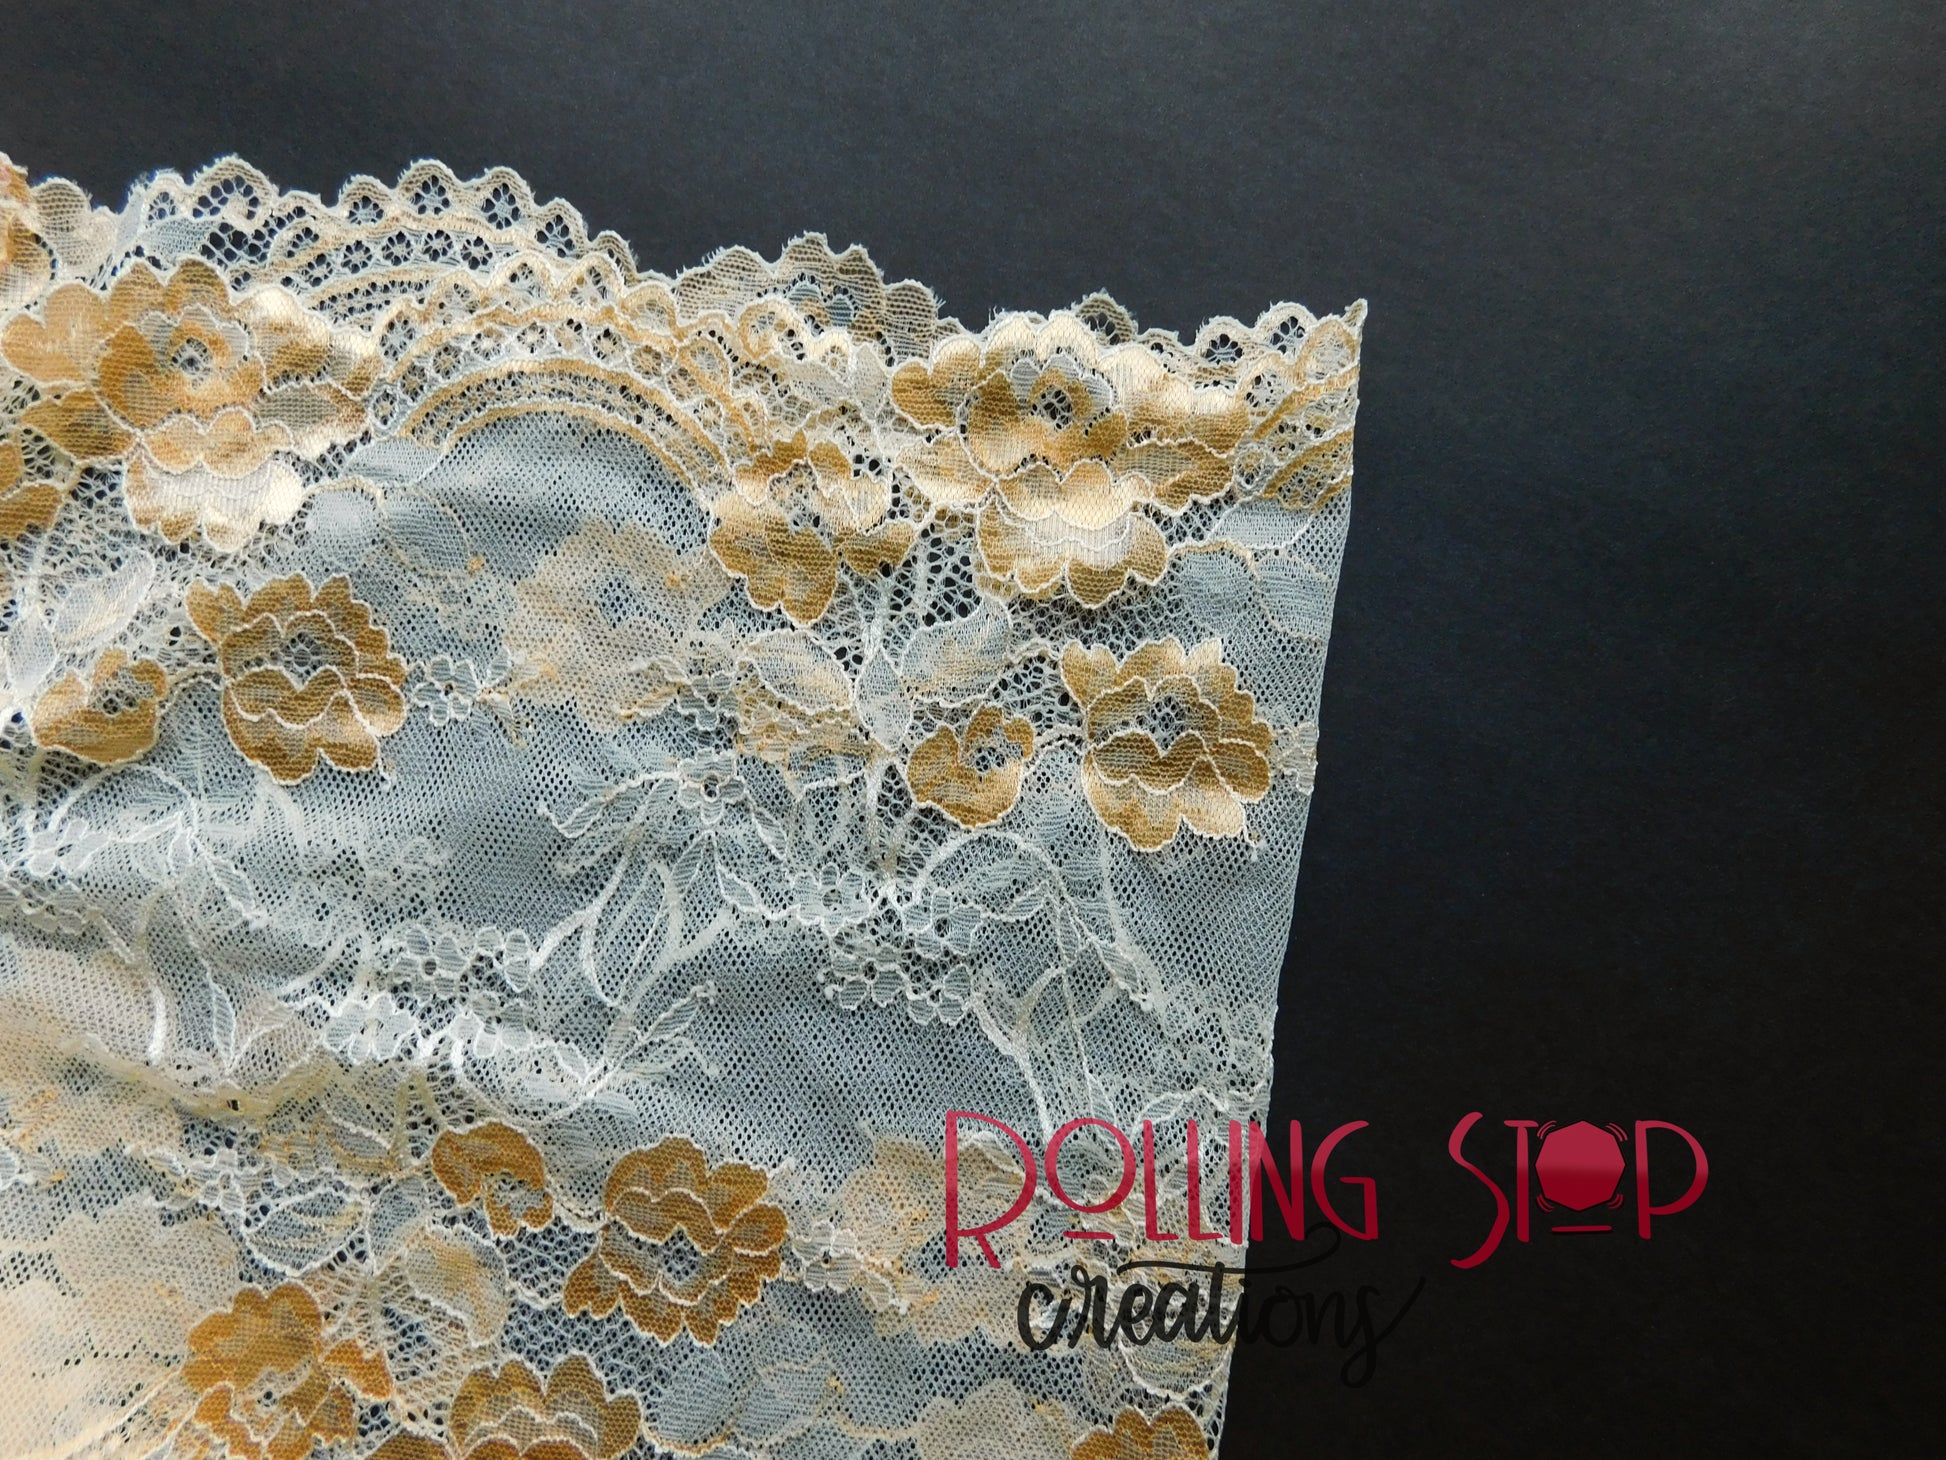 Peaches and Cream Cheeky Lace Jundies by Rolling Stop Creations sold by Rolling Stop Creations Jundies - Lingerie - Pan